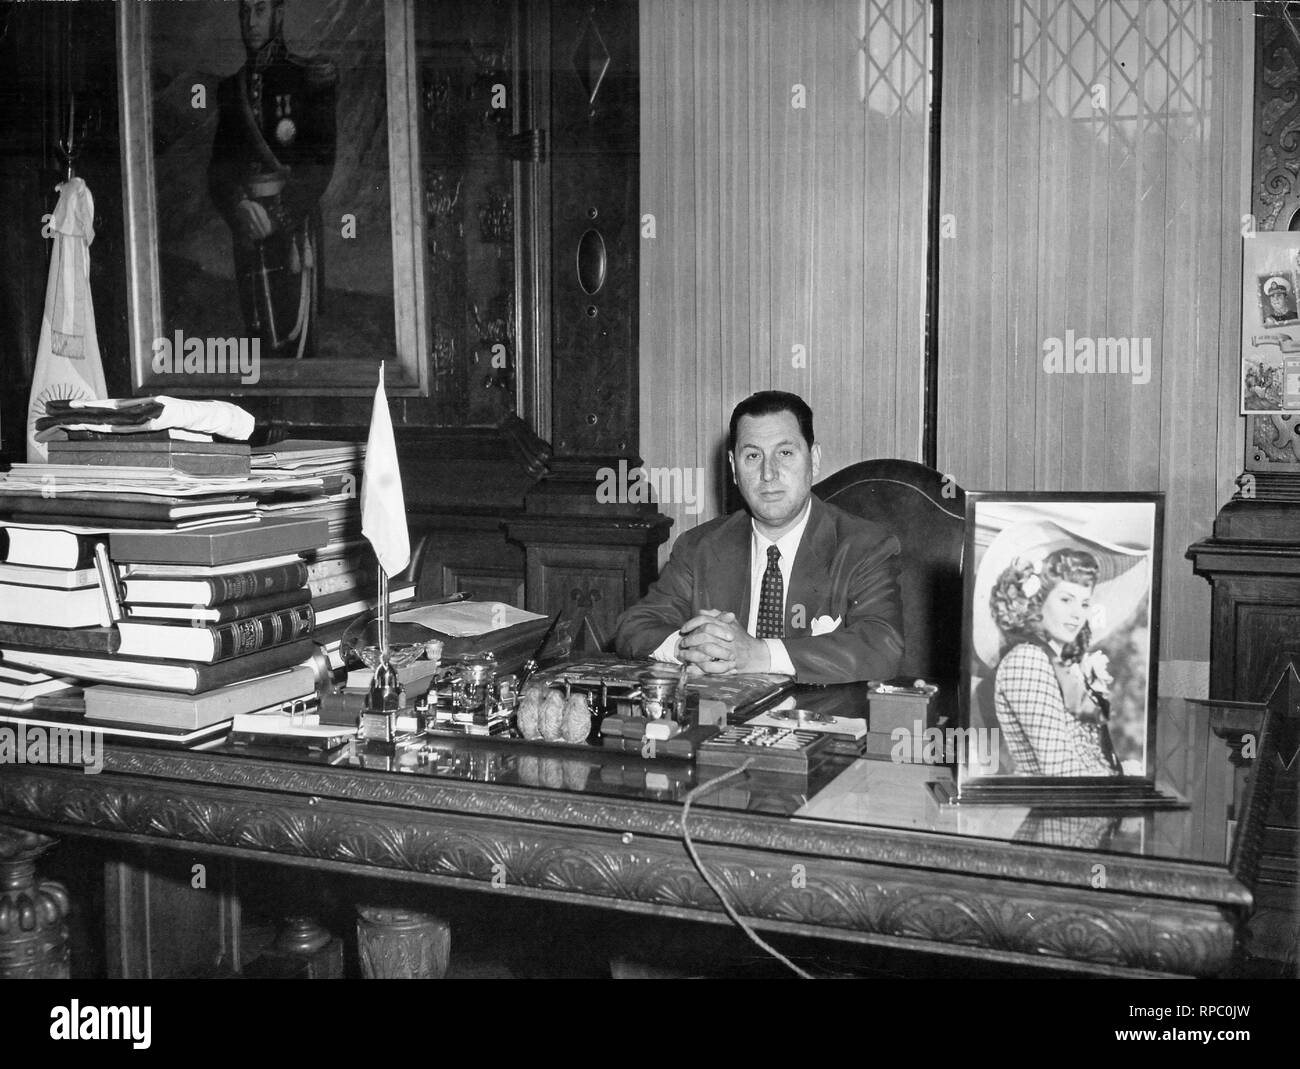 Former Argentinian President, Juan Domingo Peron, at the presidential office in Casa Rosada (House of Goverment) - Year 1948 Stock Photo